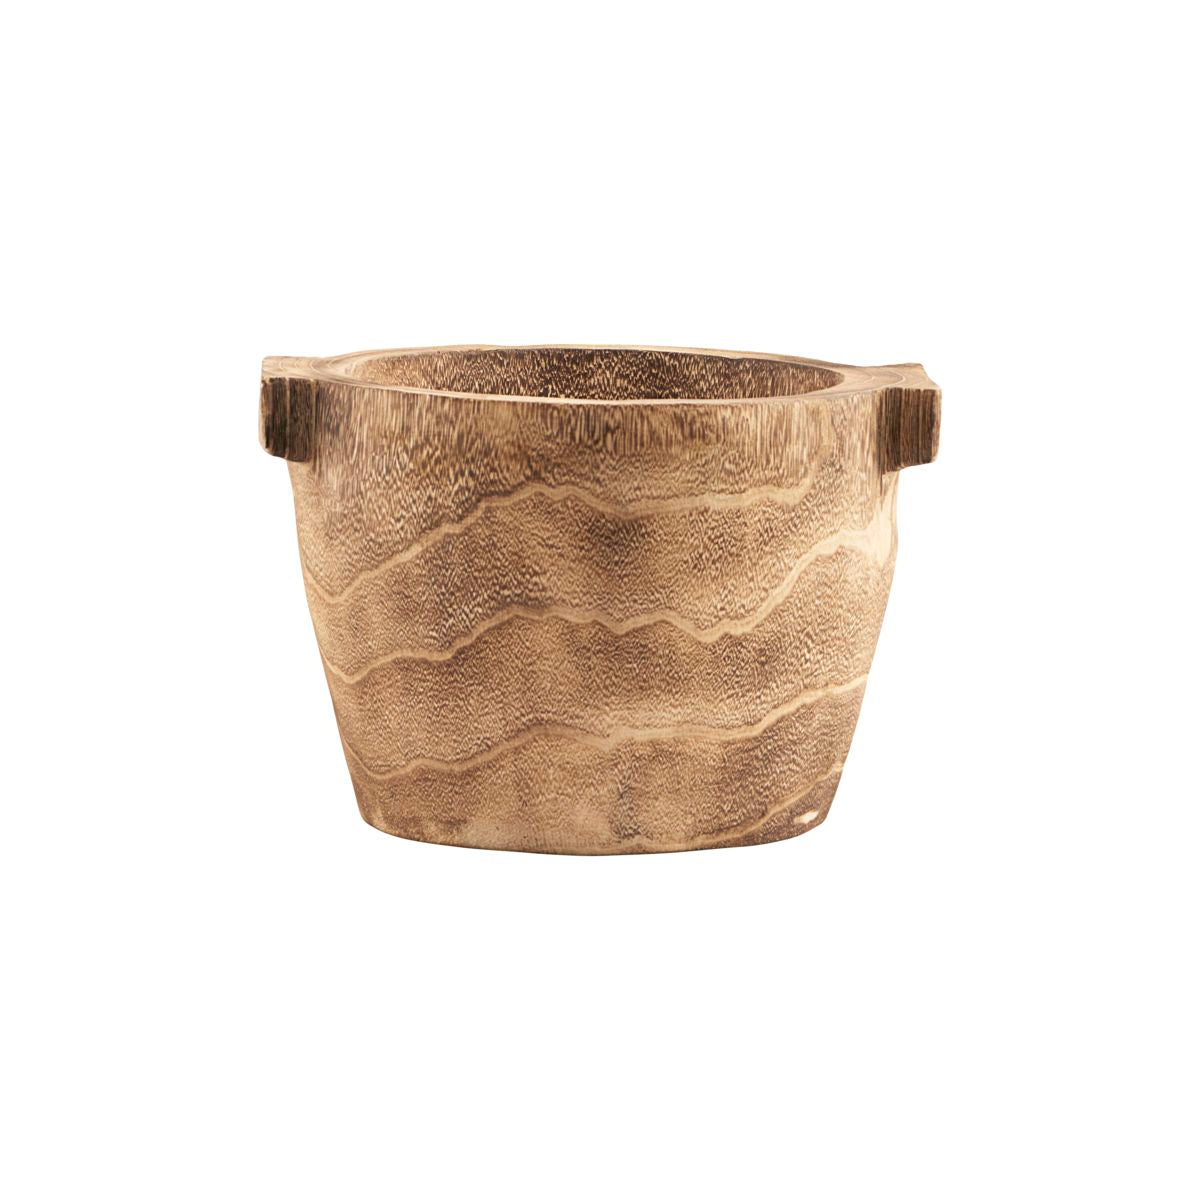 Wooden Storage Bowl, One-of-a-Kind